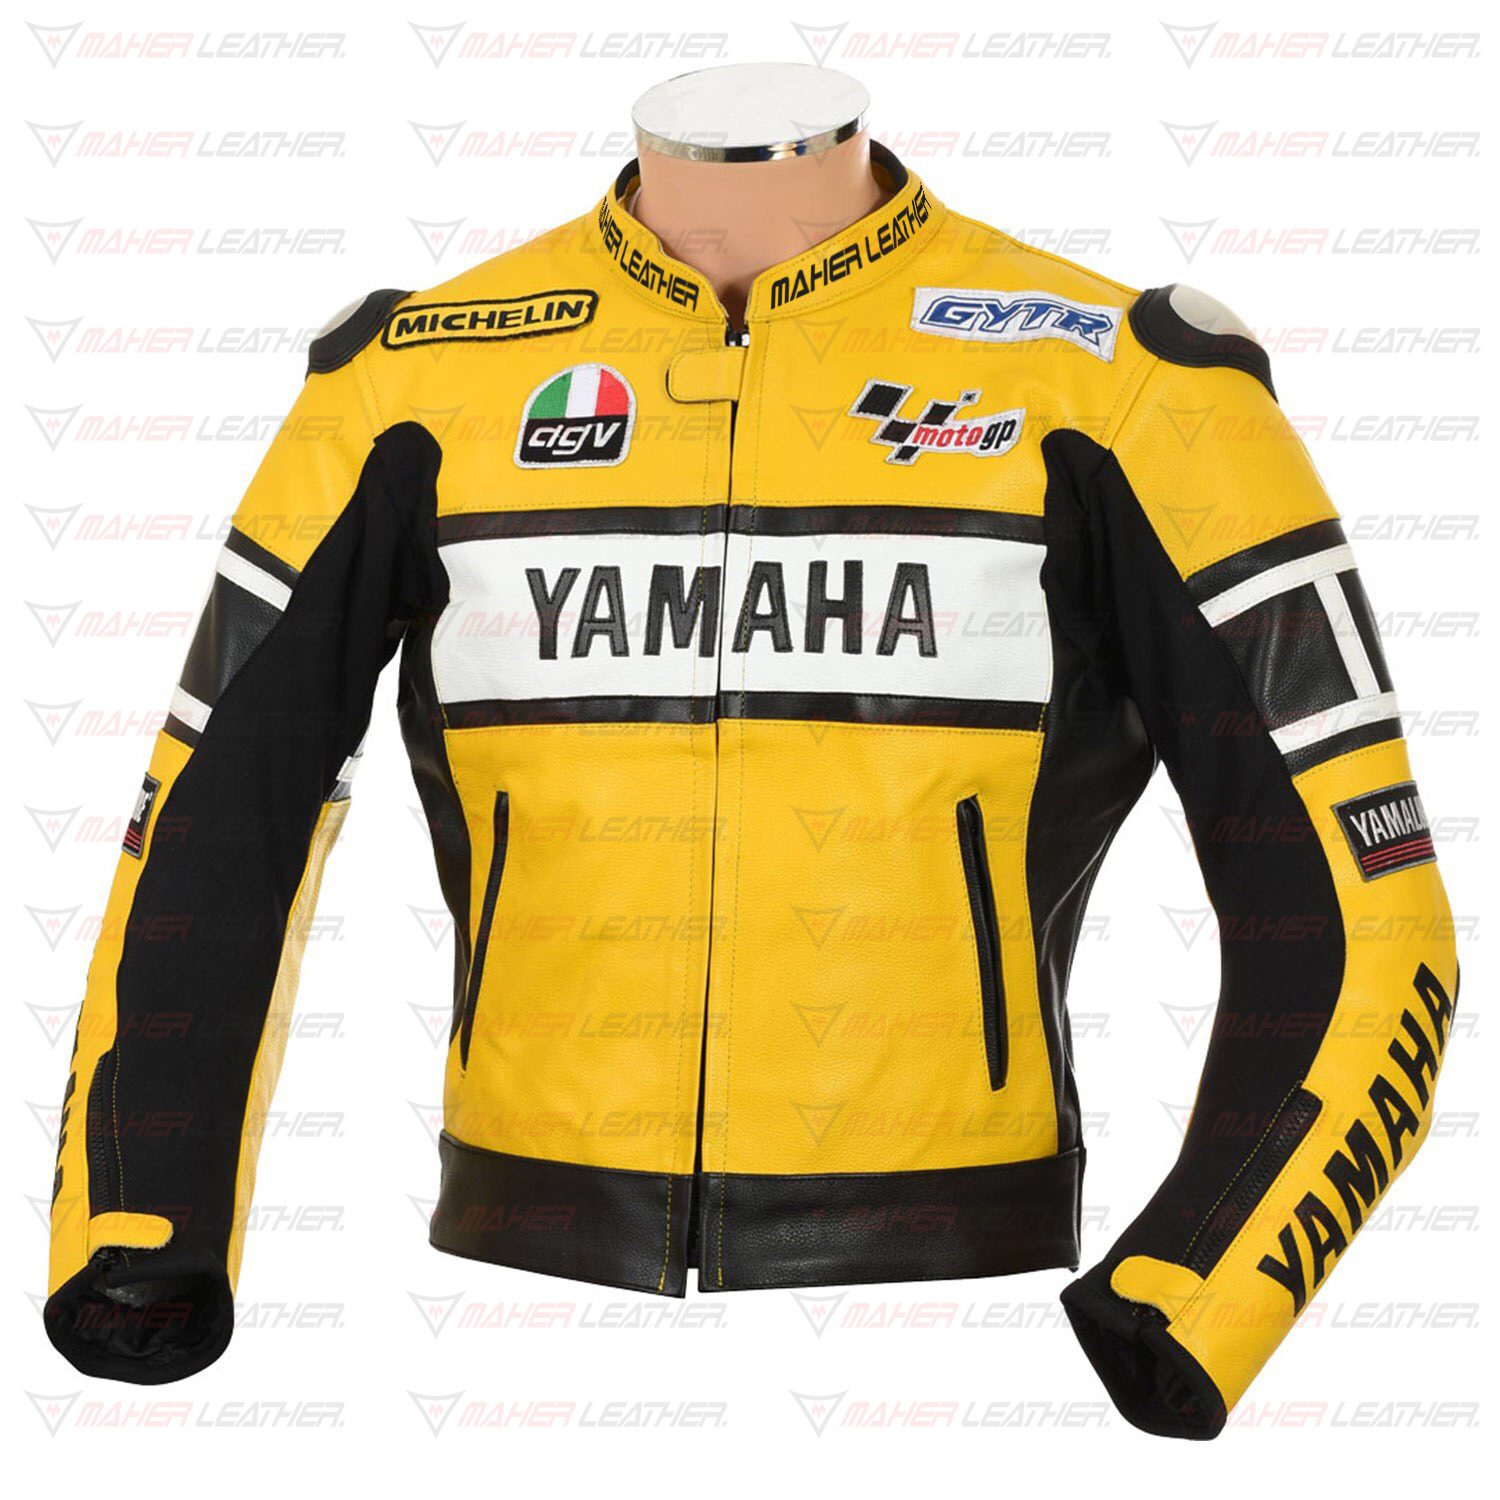 The front look of Yamaha leather riding jacket